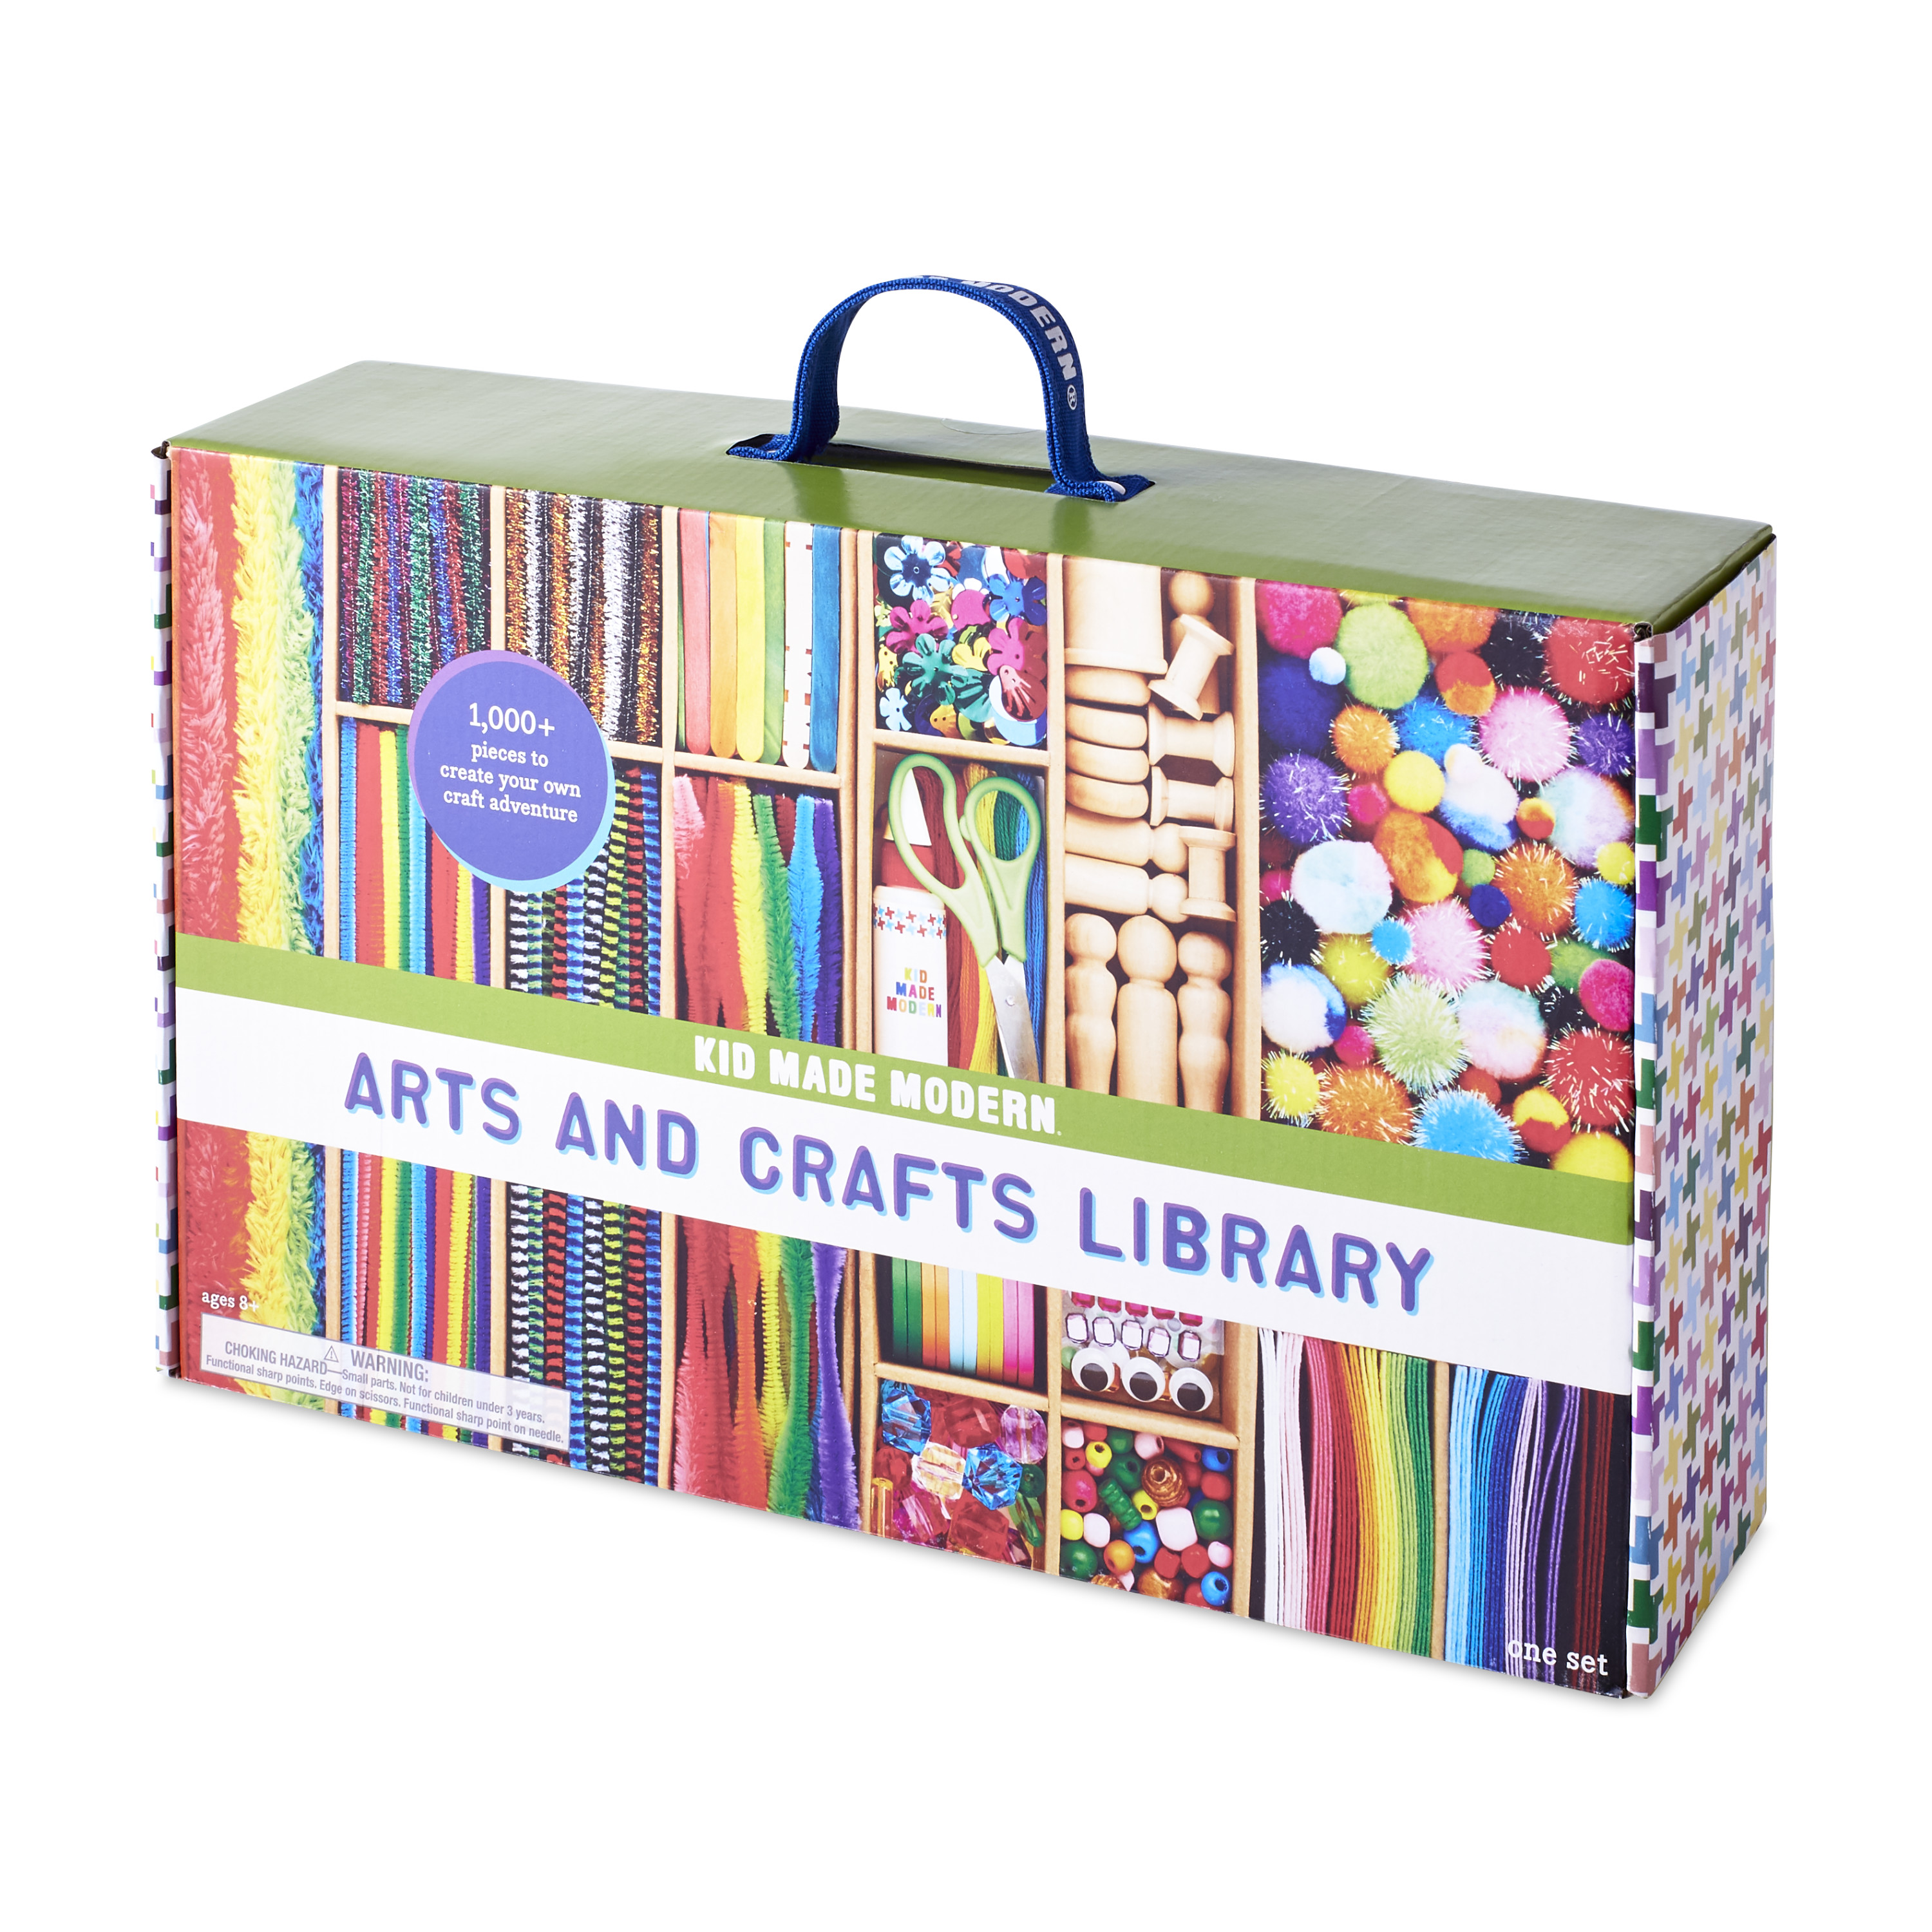 Kid Made Modern Arts and Crafts Library - Craft Set for Kids Ages 6 and Up - image 5 of 5